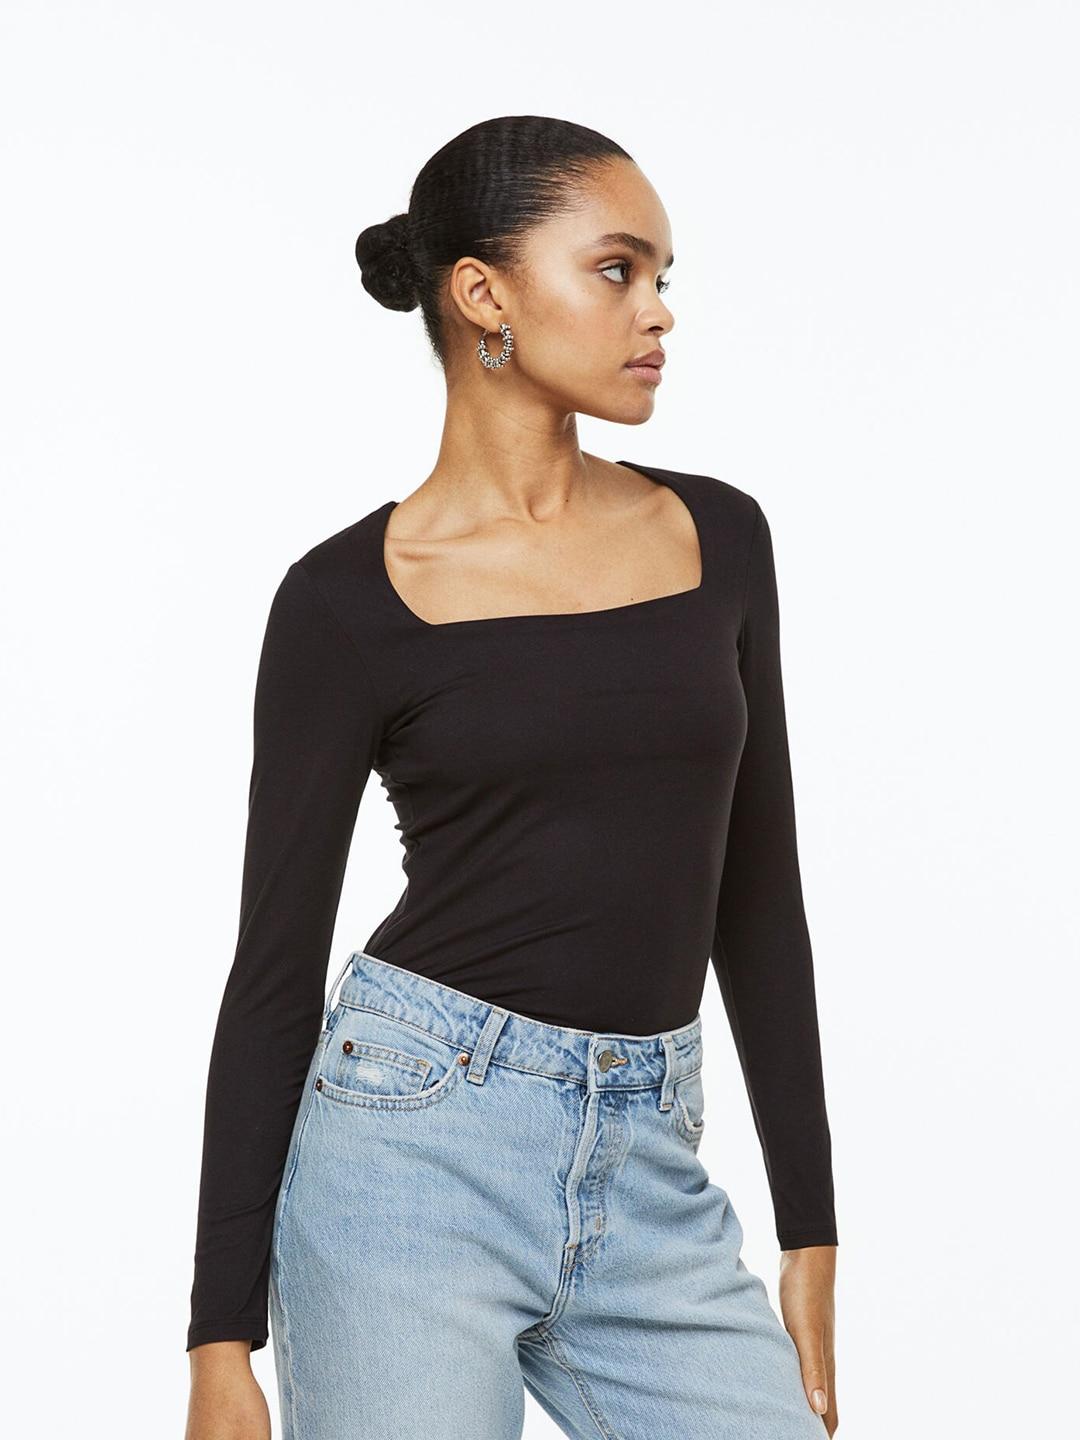 h&m-long-sleeved-jersey-top